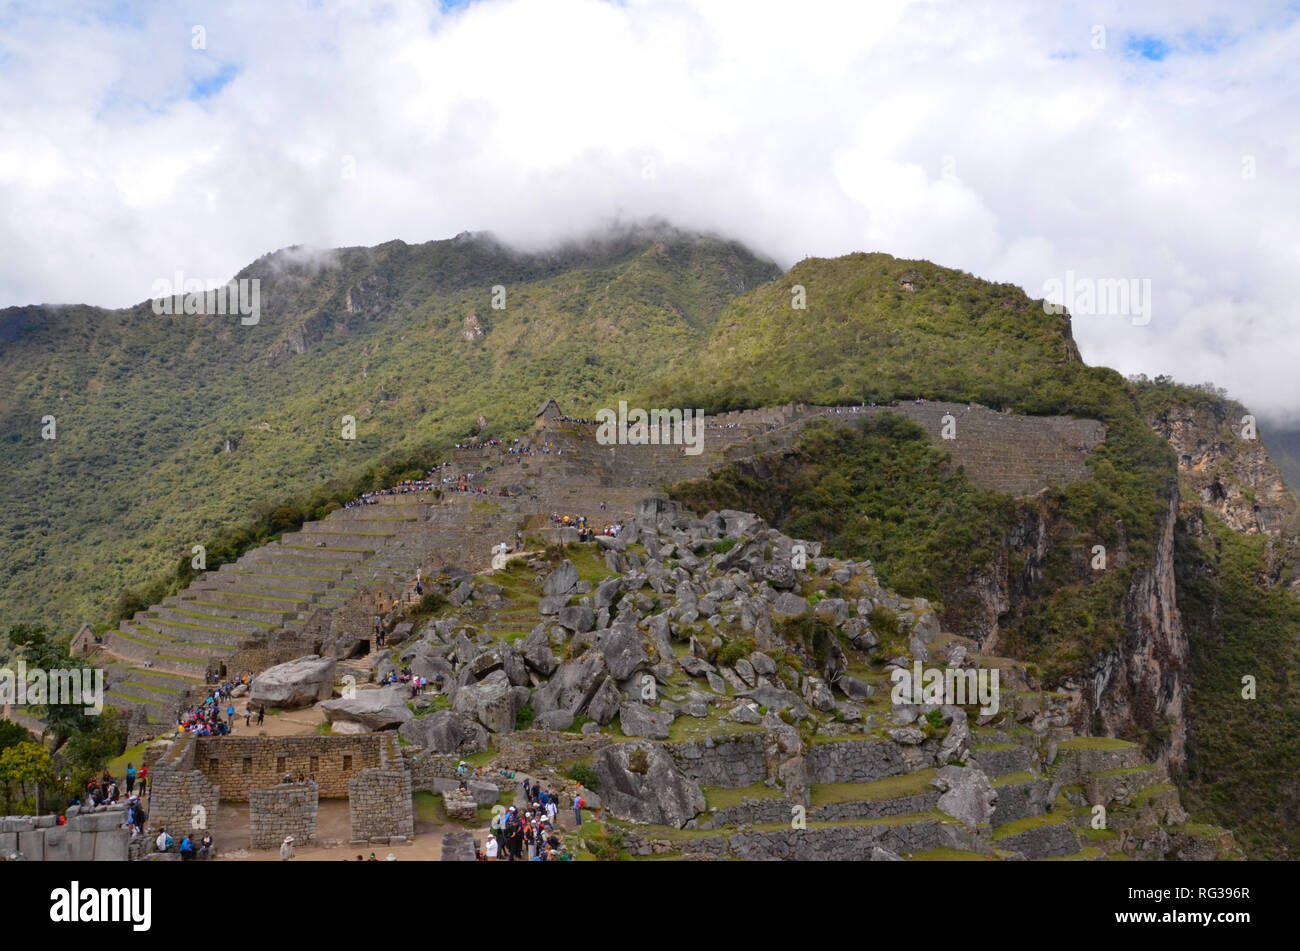 MACHU PICCHU / PERU, August 16, 2018: The quarry is visible from this side view of Machu Picchu. Stock Photo